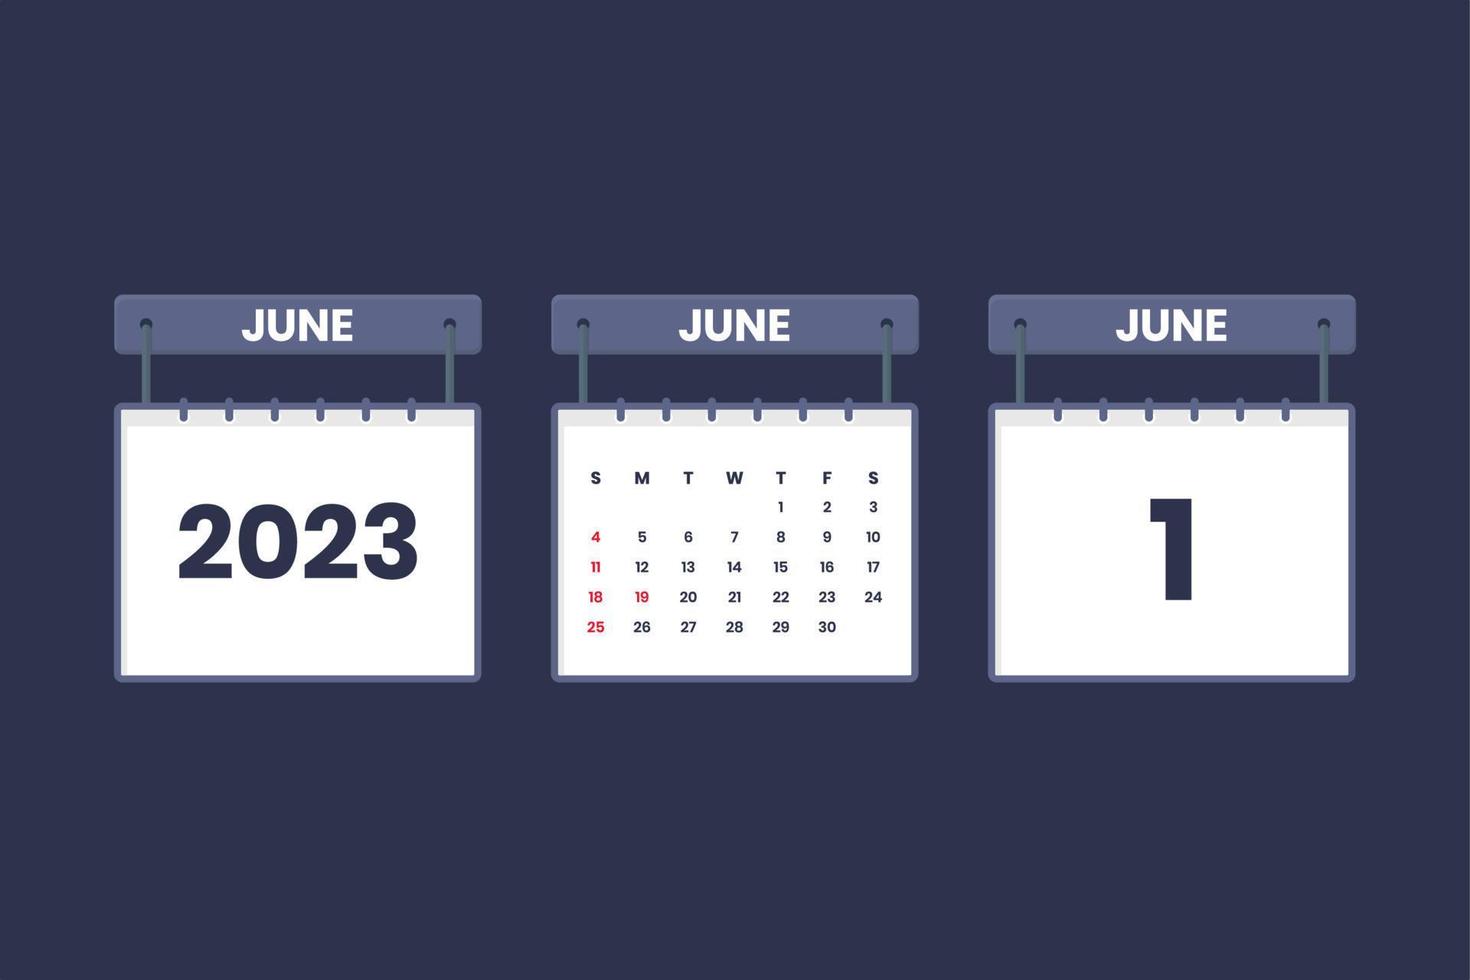 1 June 2023 calendar icon for schedule, appointment, important date concept vector